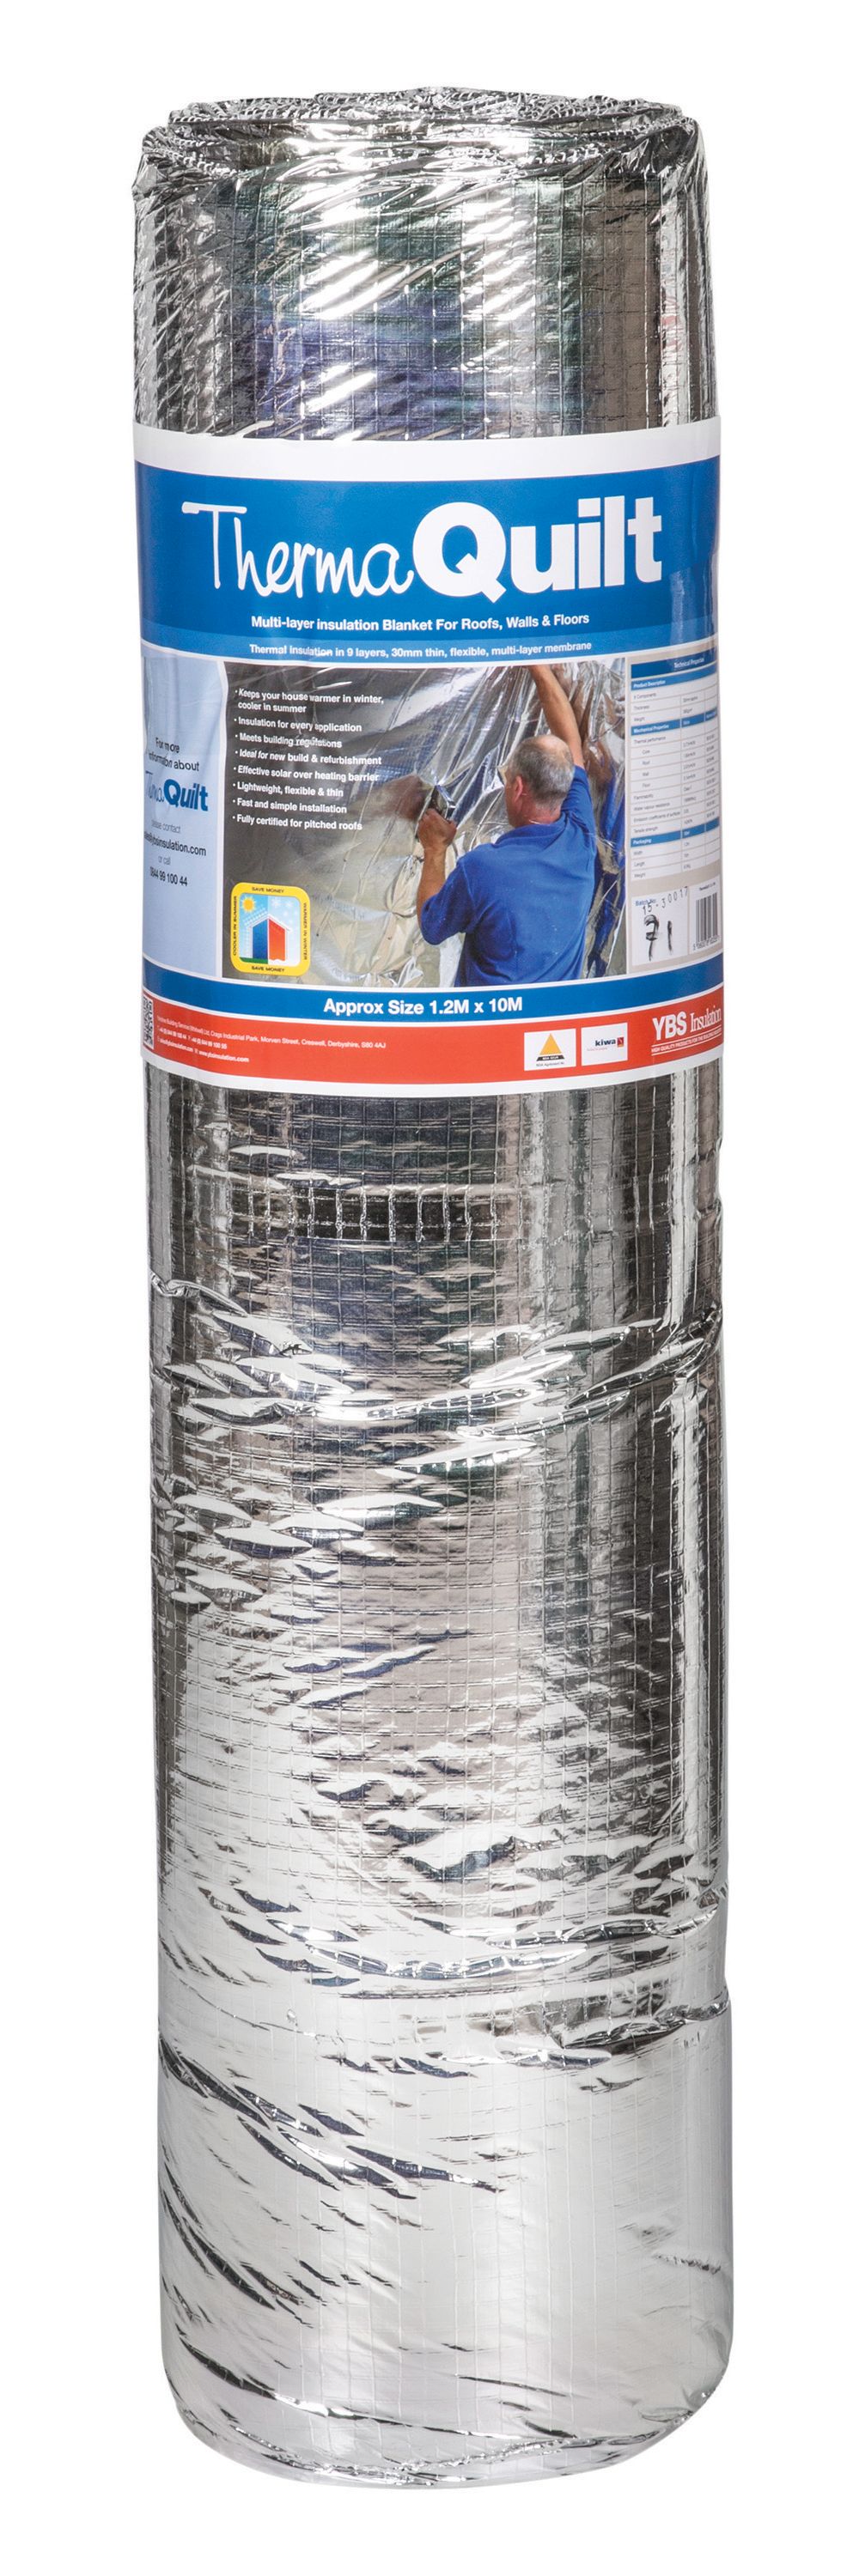 YBS ThermaQuilt Multifoil 32mm Insulation Roll - 1.2 x 10m